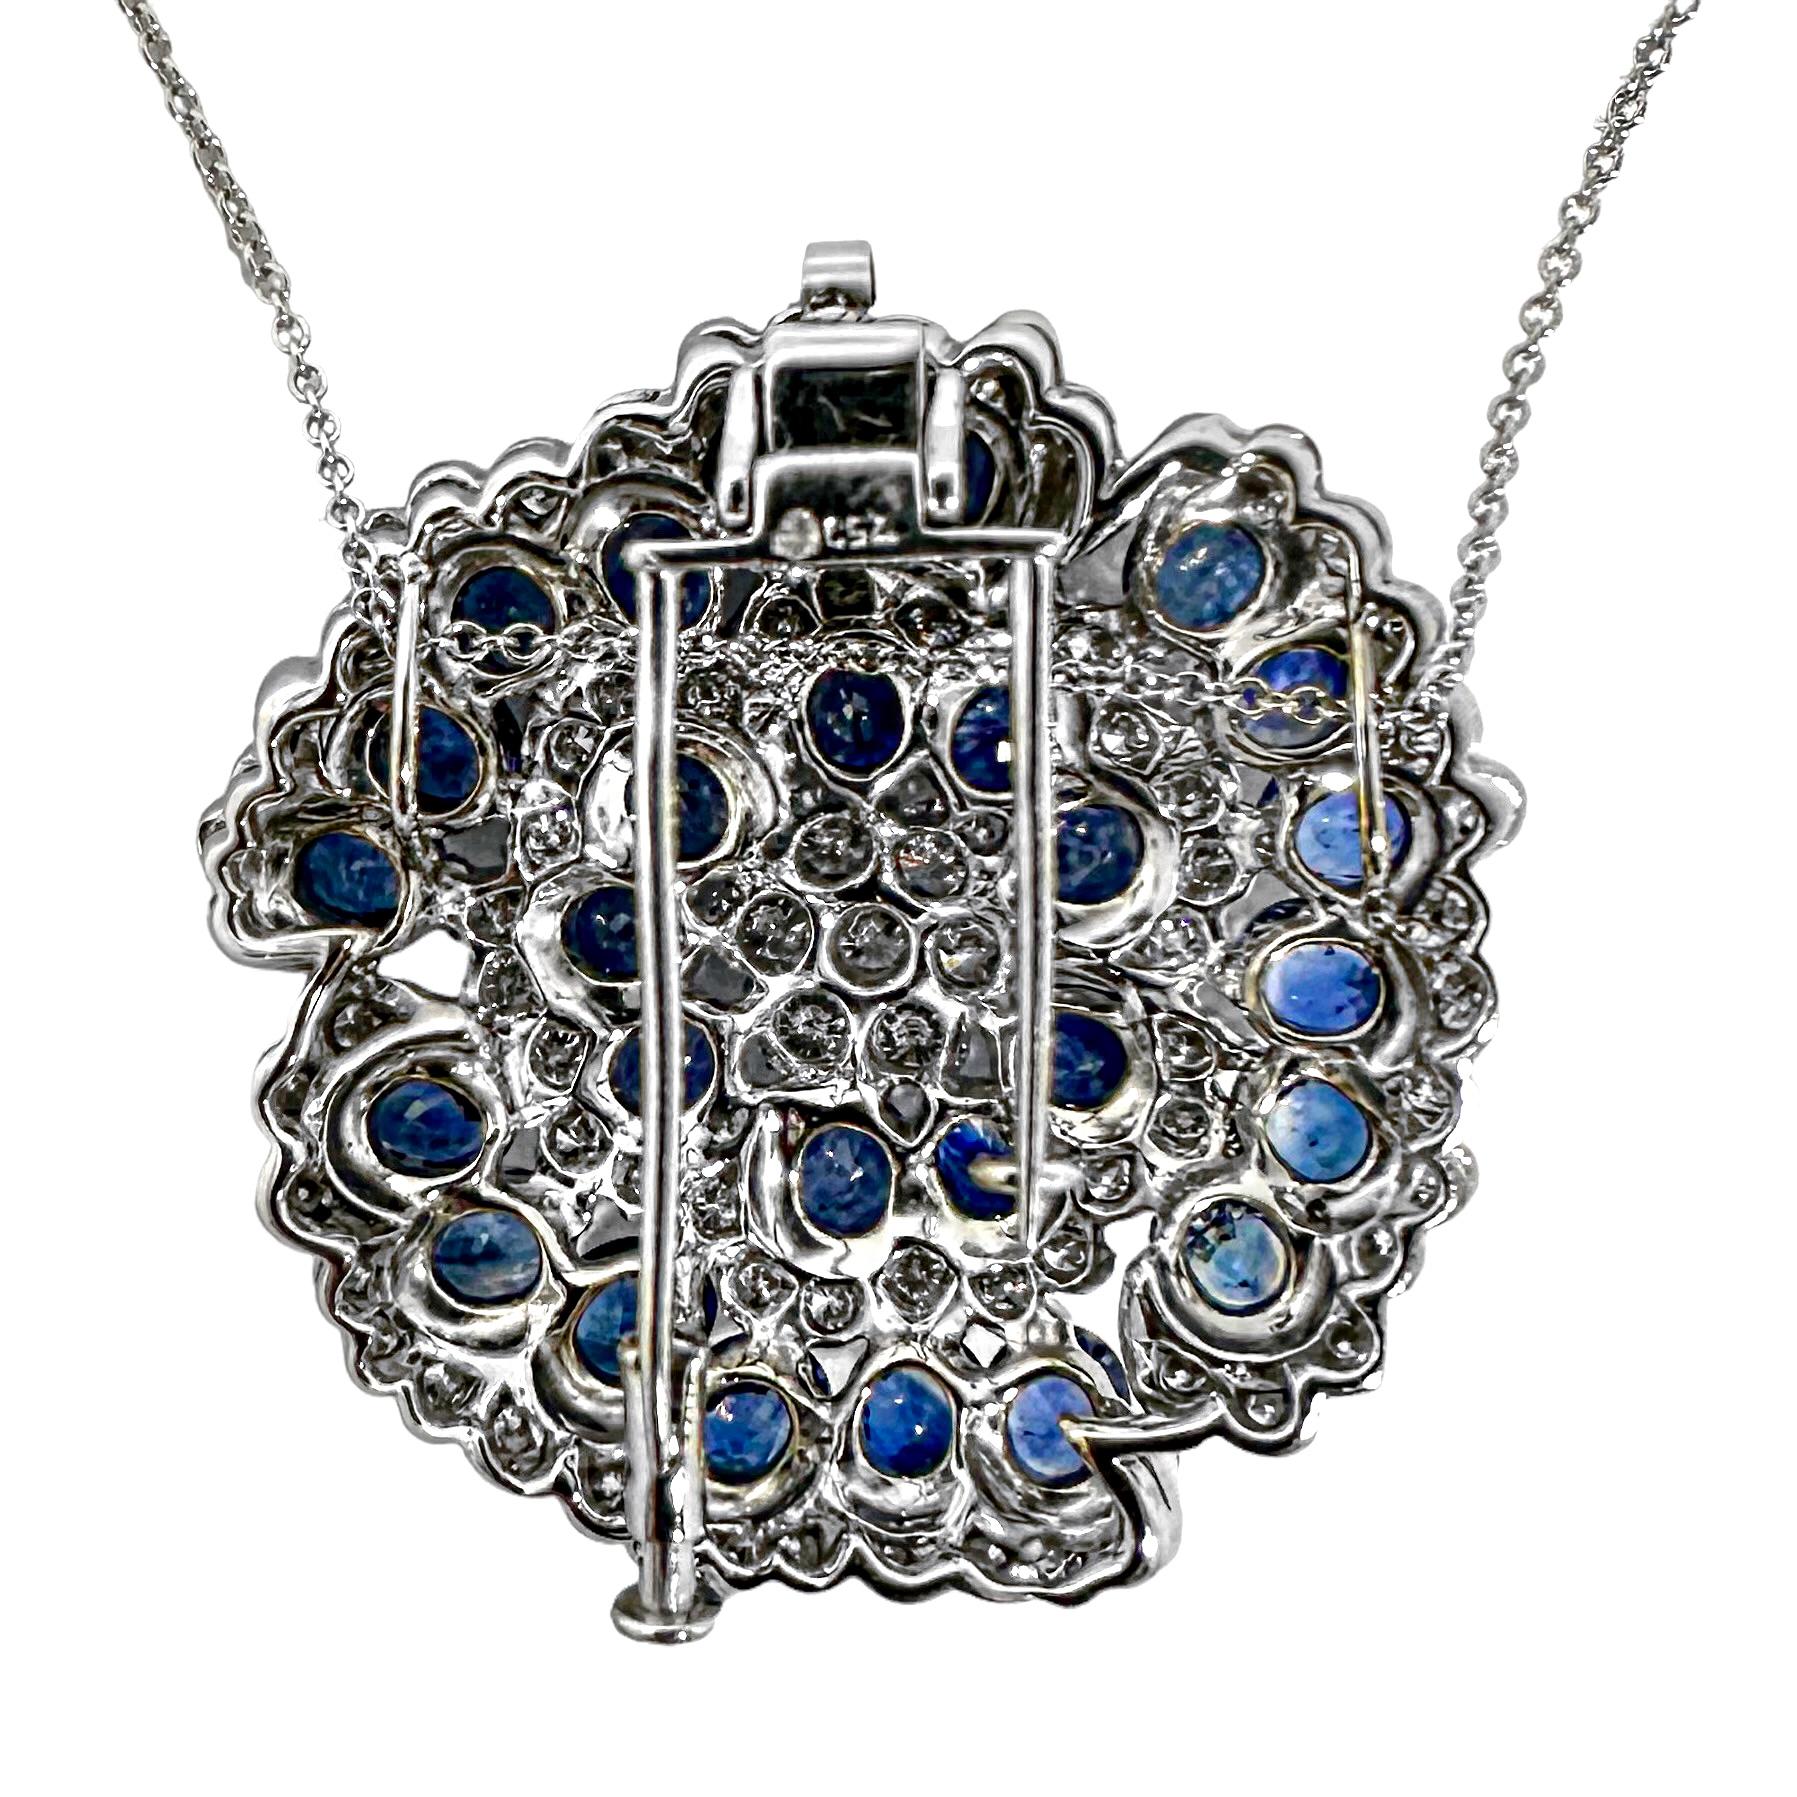 This sublime vintage 18k white gold vintage camellia flower pendant / brooch is set over it's entire surface with alternating lines of brilliant round diamonds and vivid blue oval faceted natural sapphires. The effect is quite commanding and